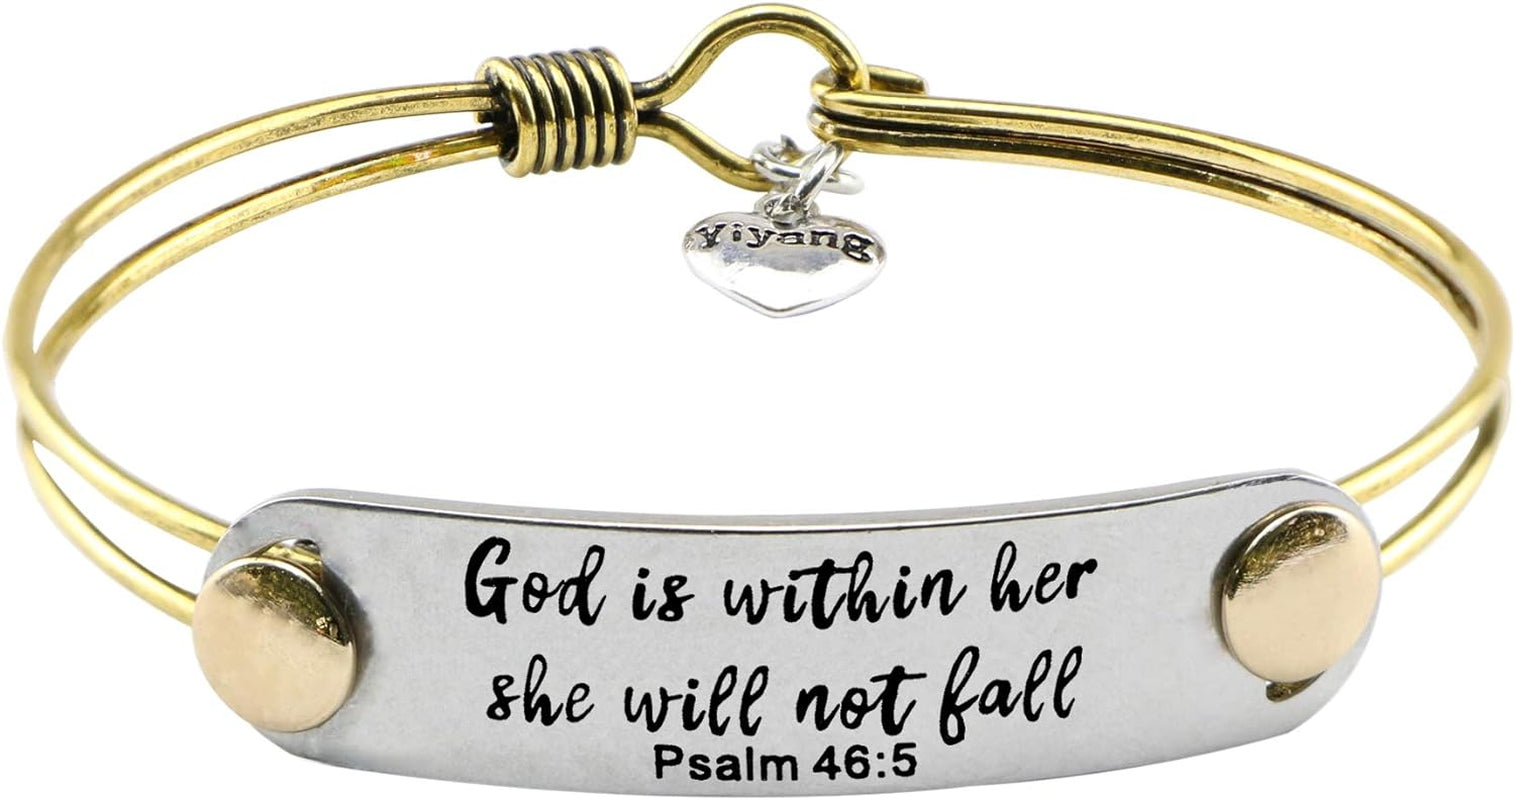 Birthday Gifts for Women Inspirational Religious Bracelets for Friends Birthday Christmas Christian Jewelry for Girls Baptism